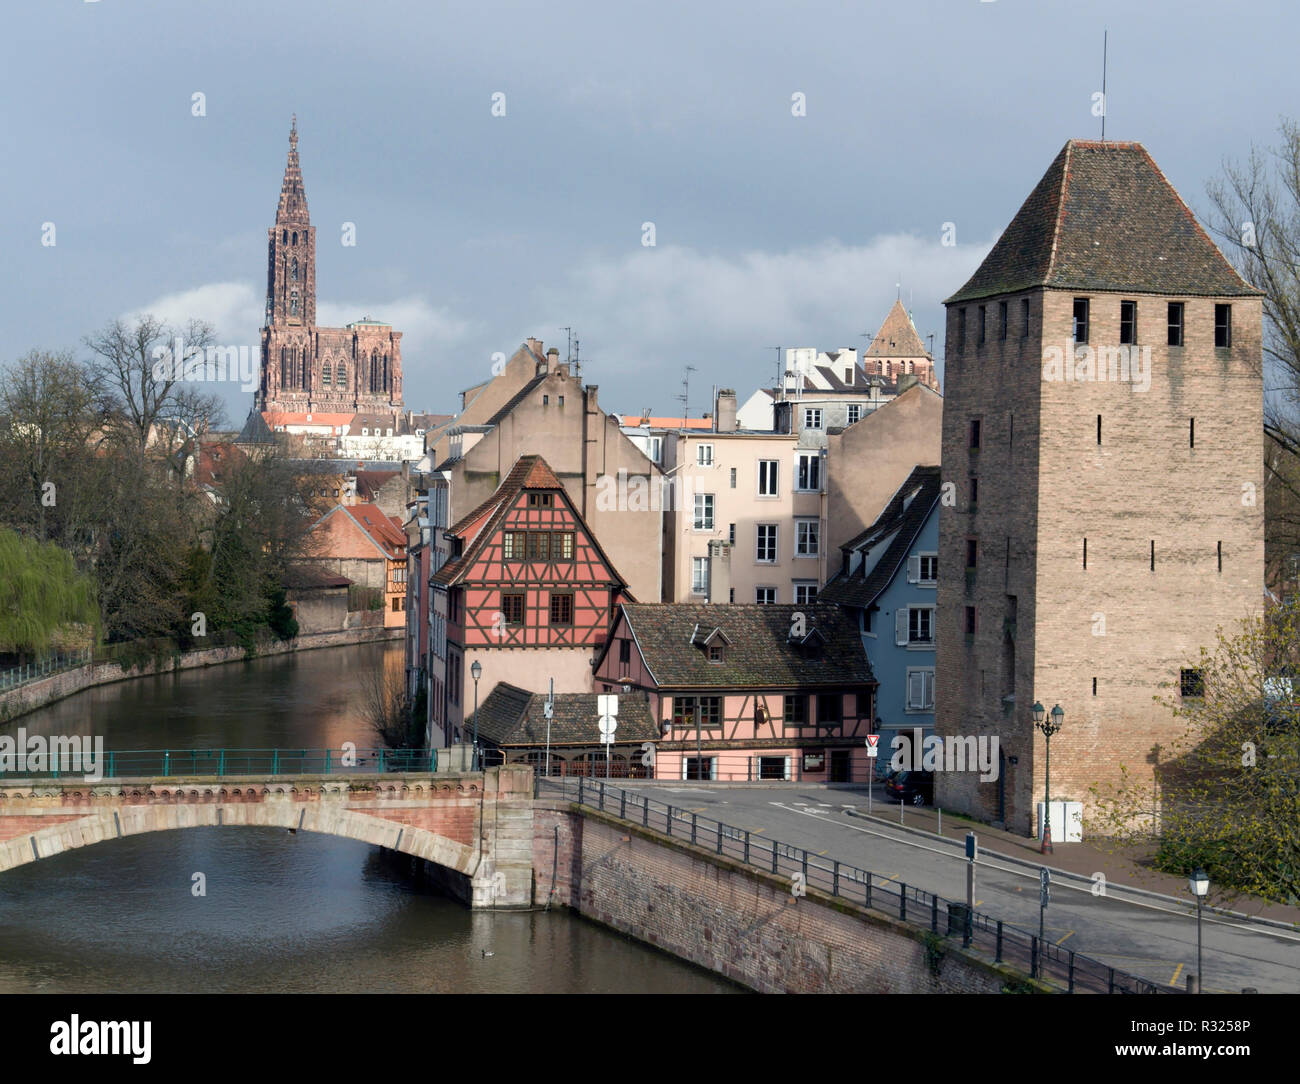 strasbourg scenery with cathedral Stock Photo